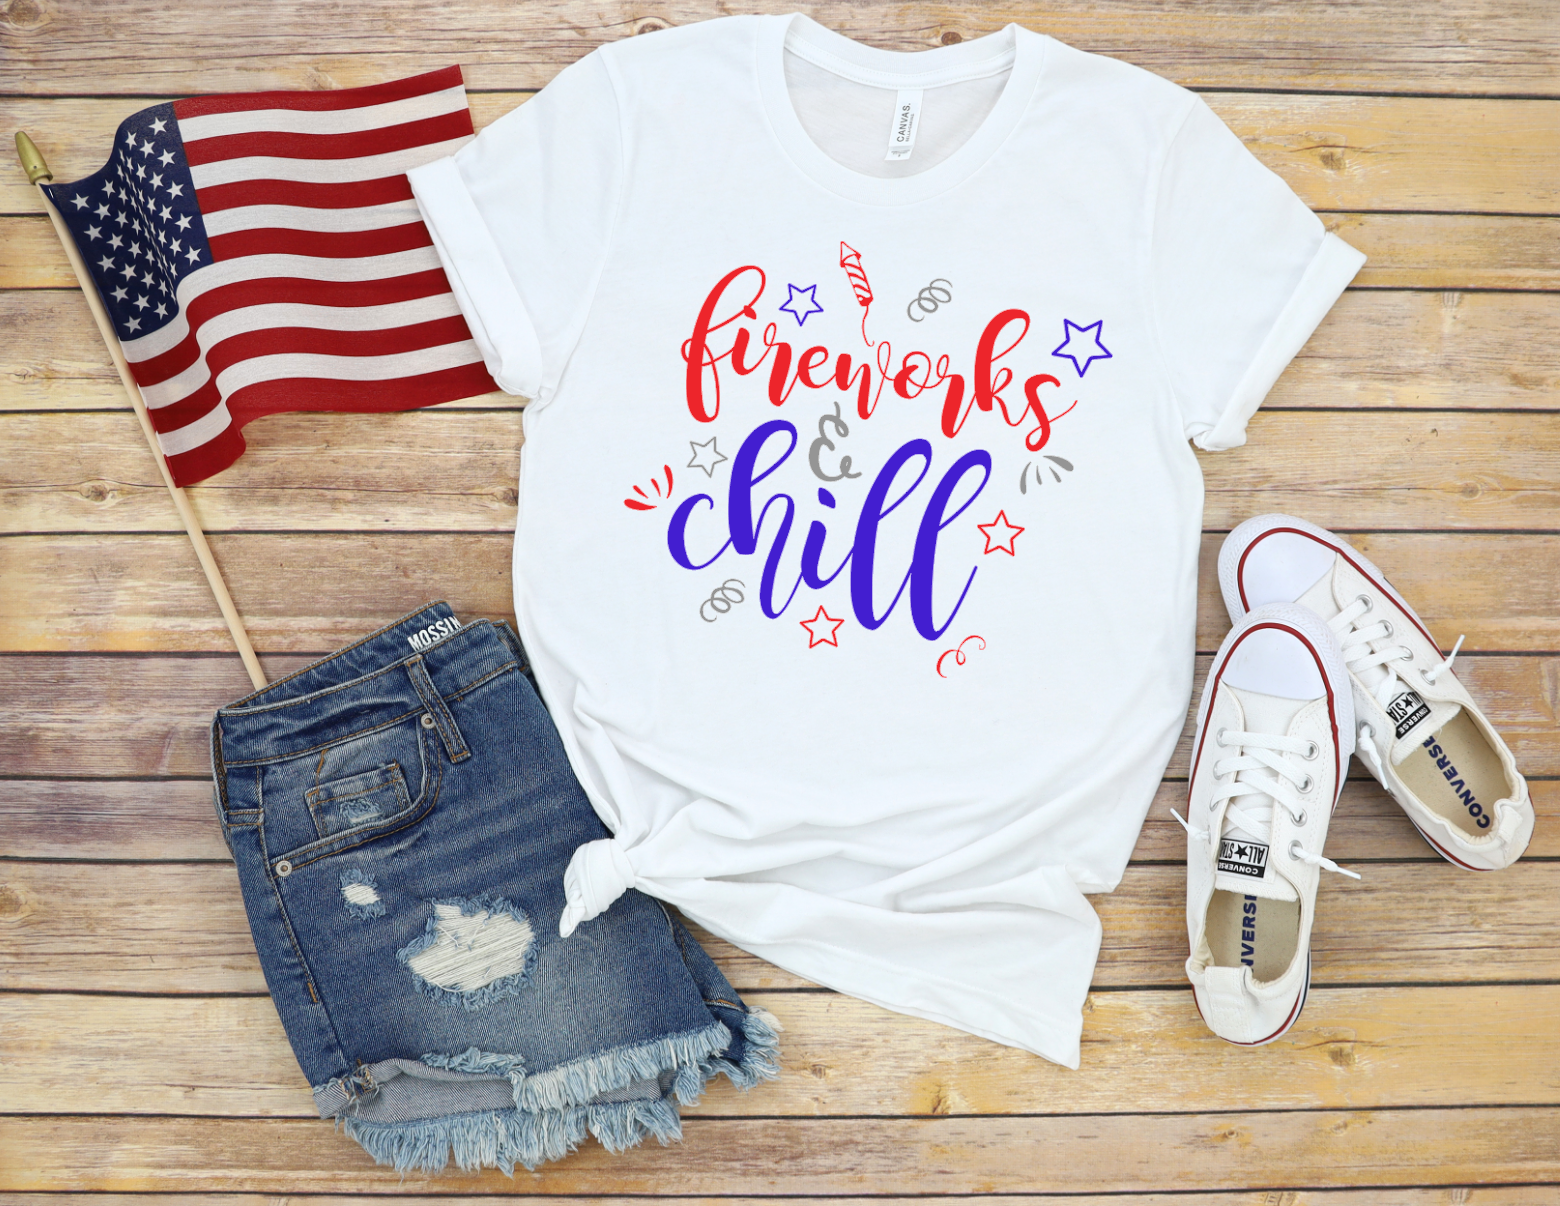 4th svg fourth of july svg funny shirt designs freedom svg patriotic svg red wine and blue svg wine cut files independence day svg